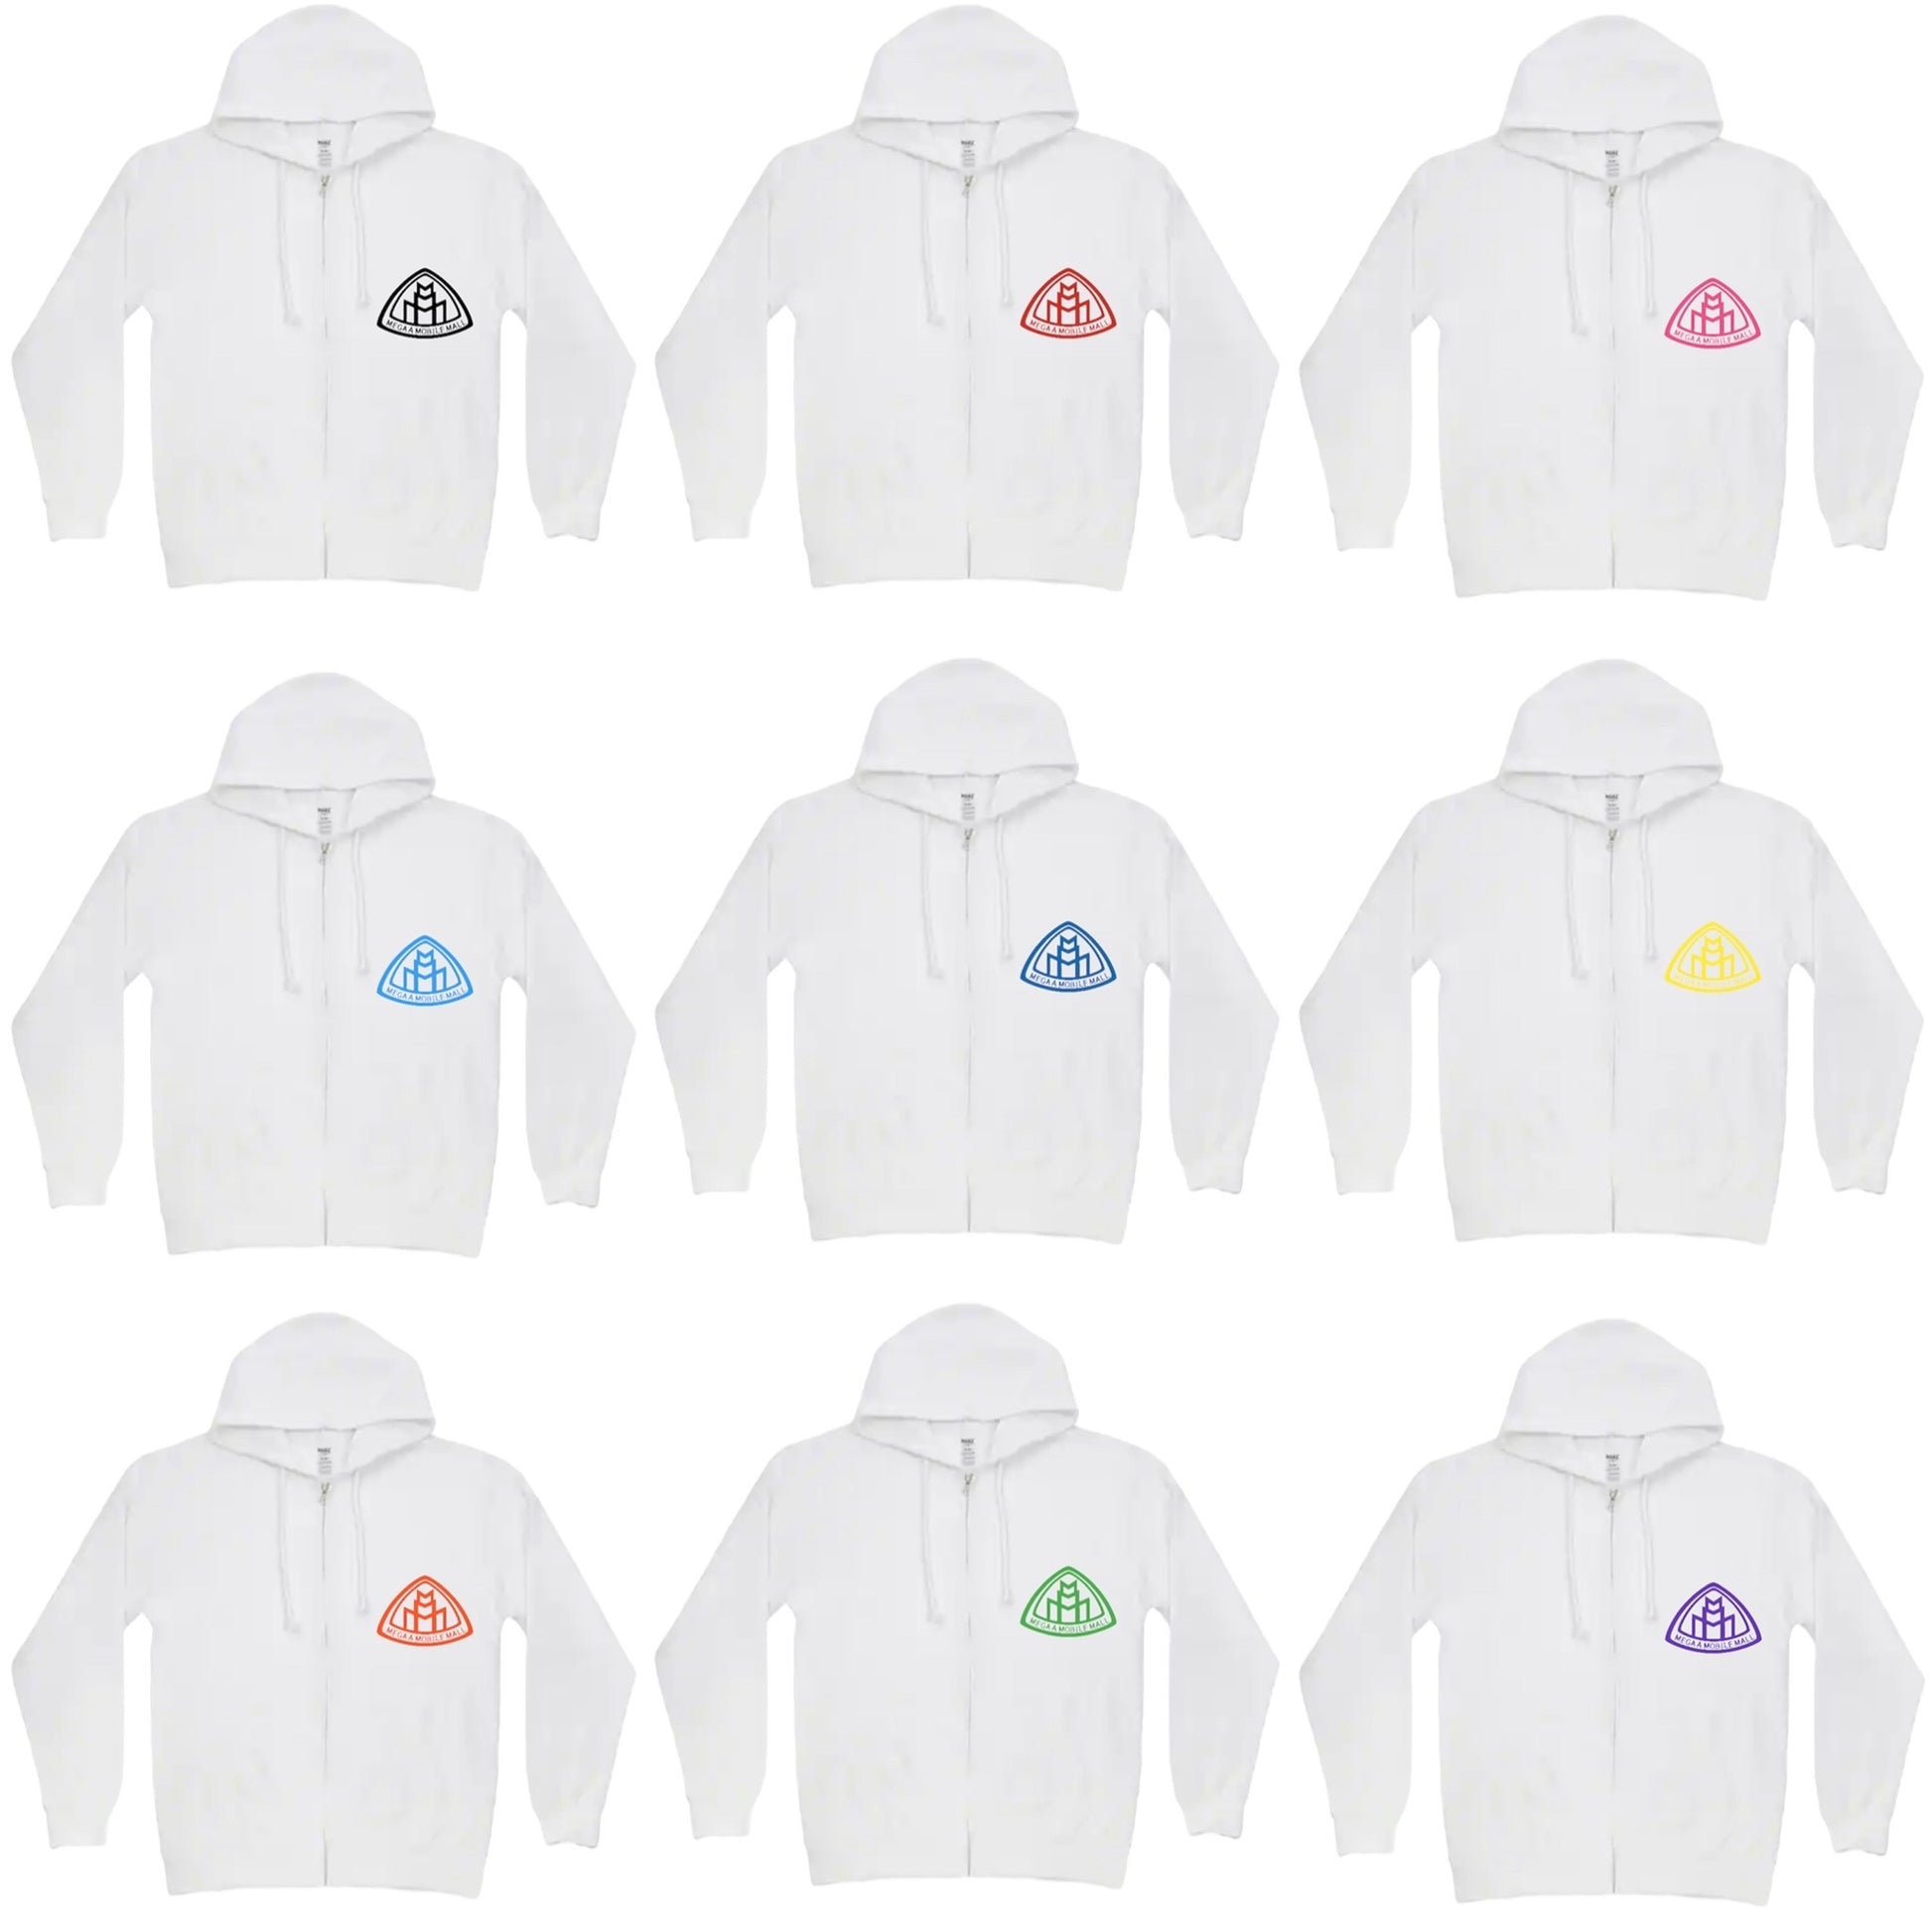 megaamobilemall white zip up hoodie in 9 different logo color options front side